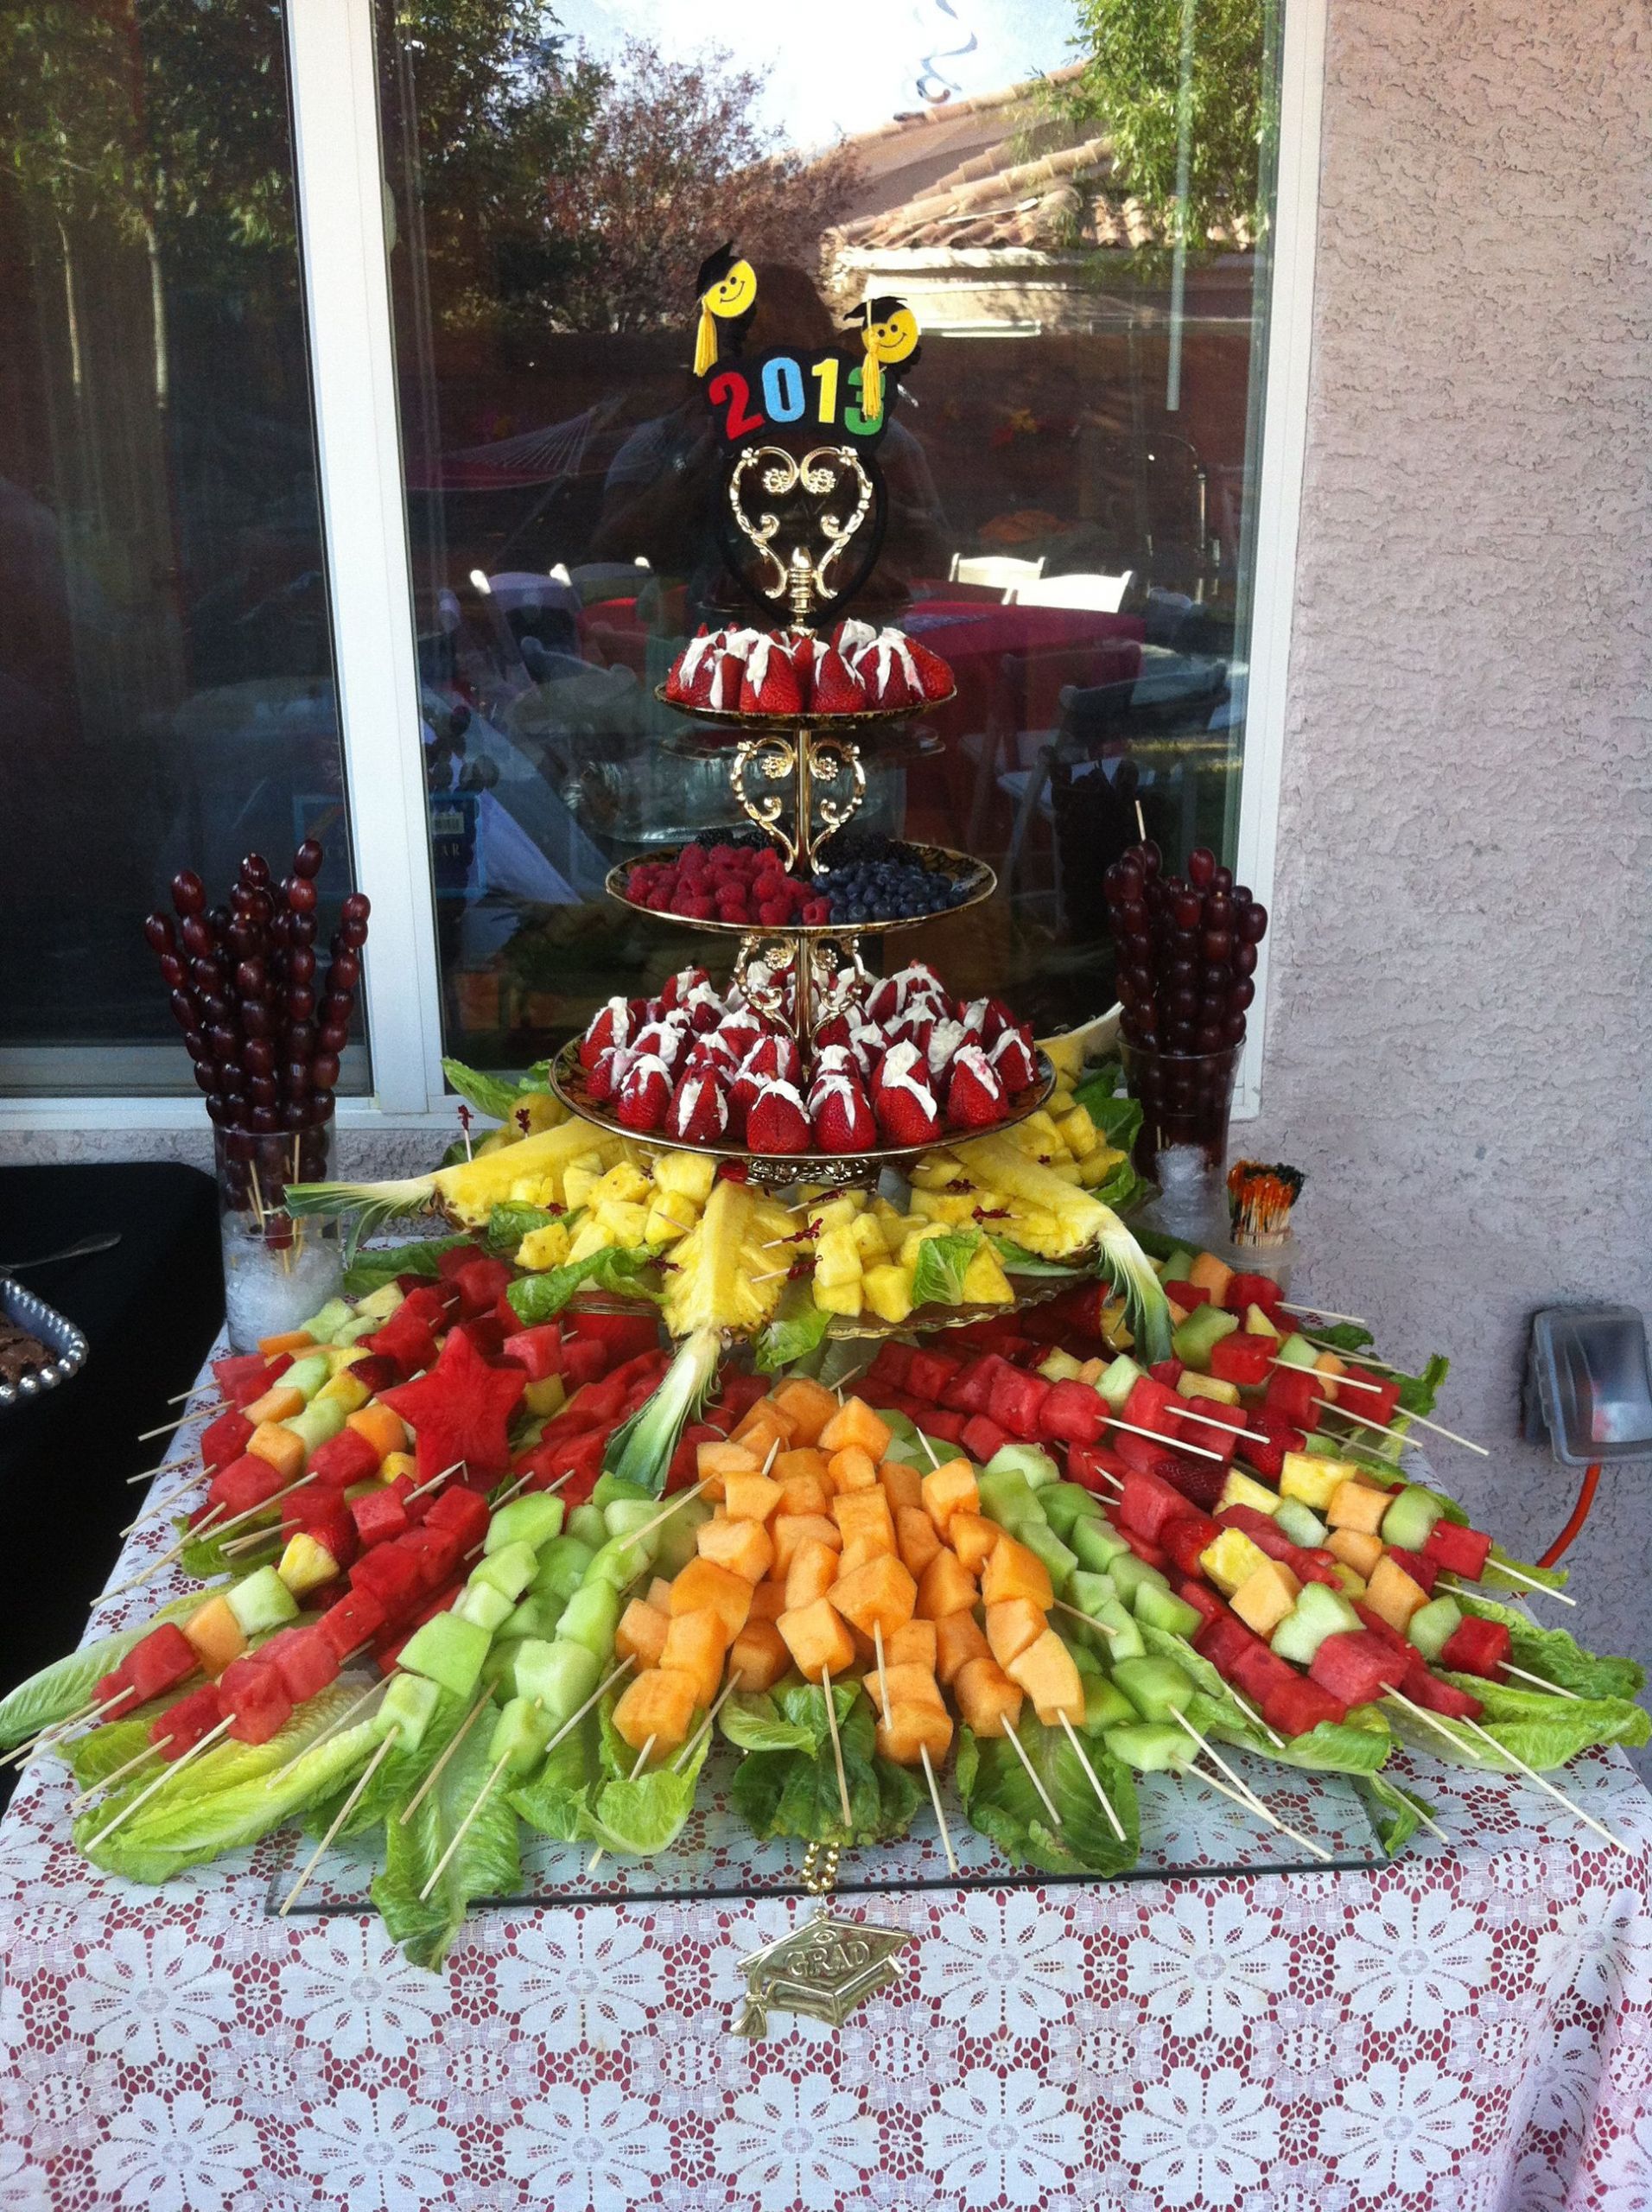 High School Graduation Party Food Ideas
 Cold and Beautiful Fresh Fruit For a Collage Graduation